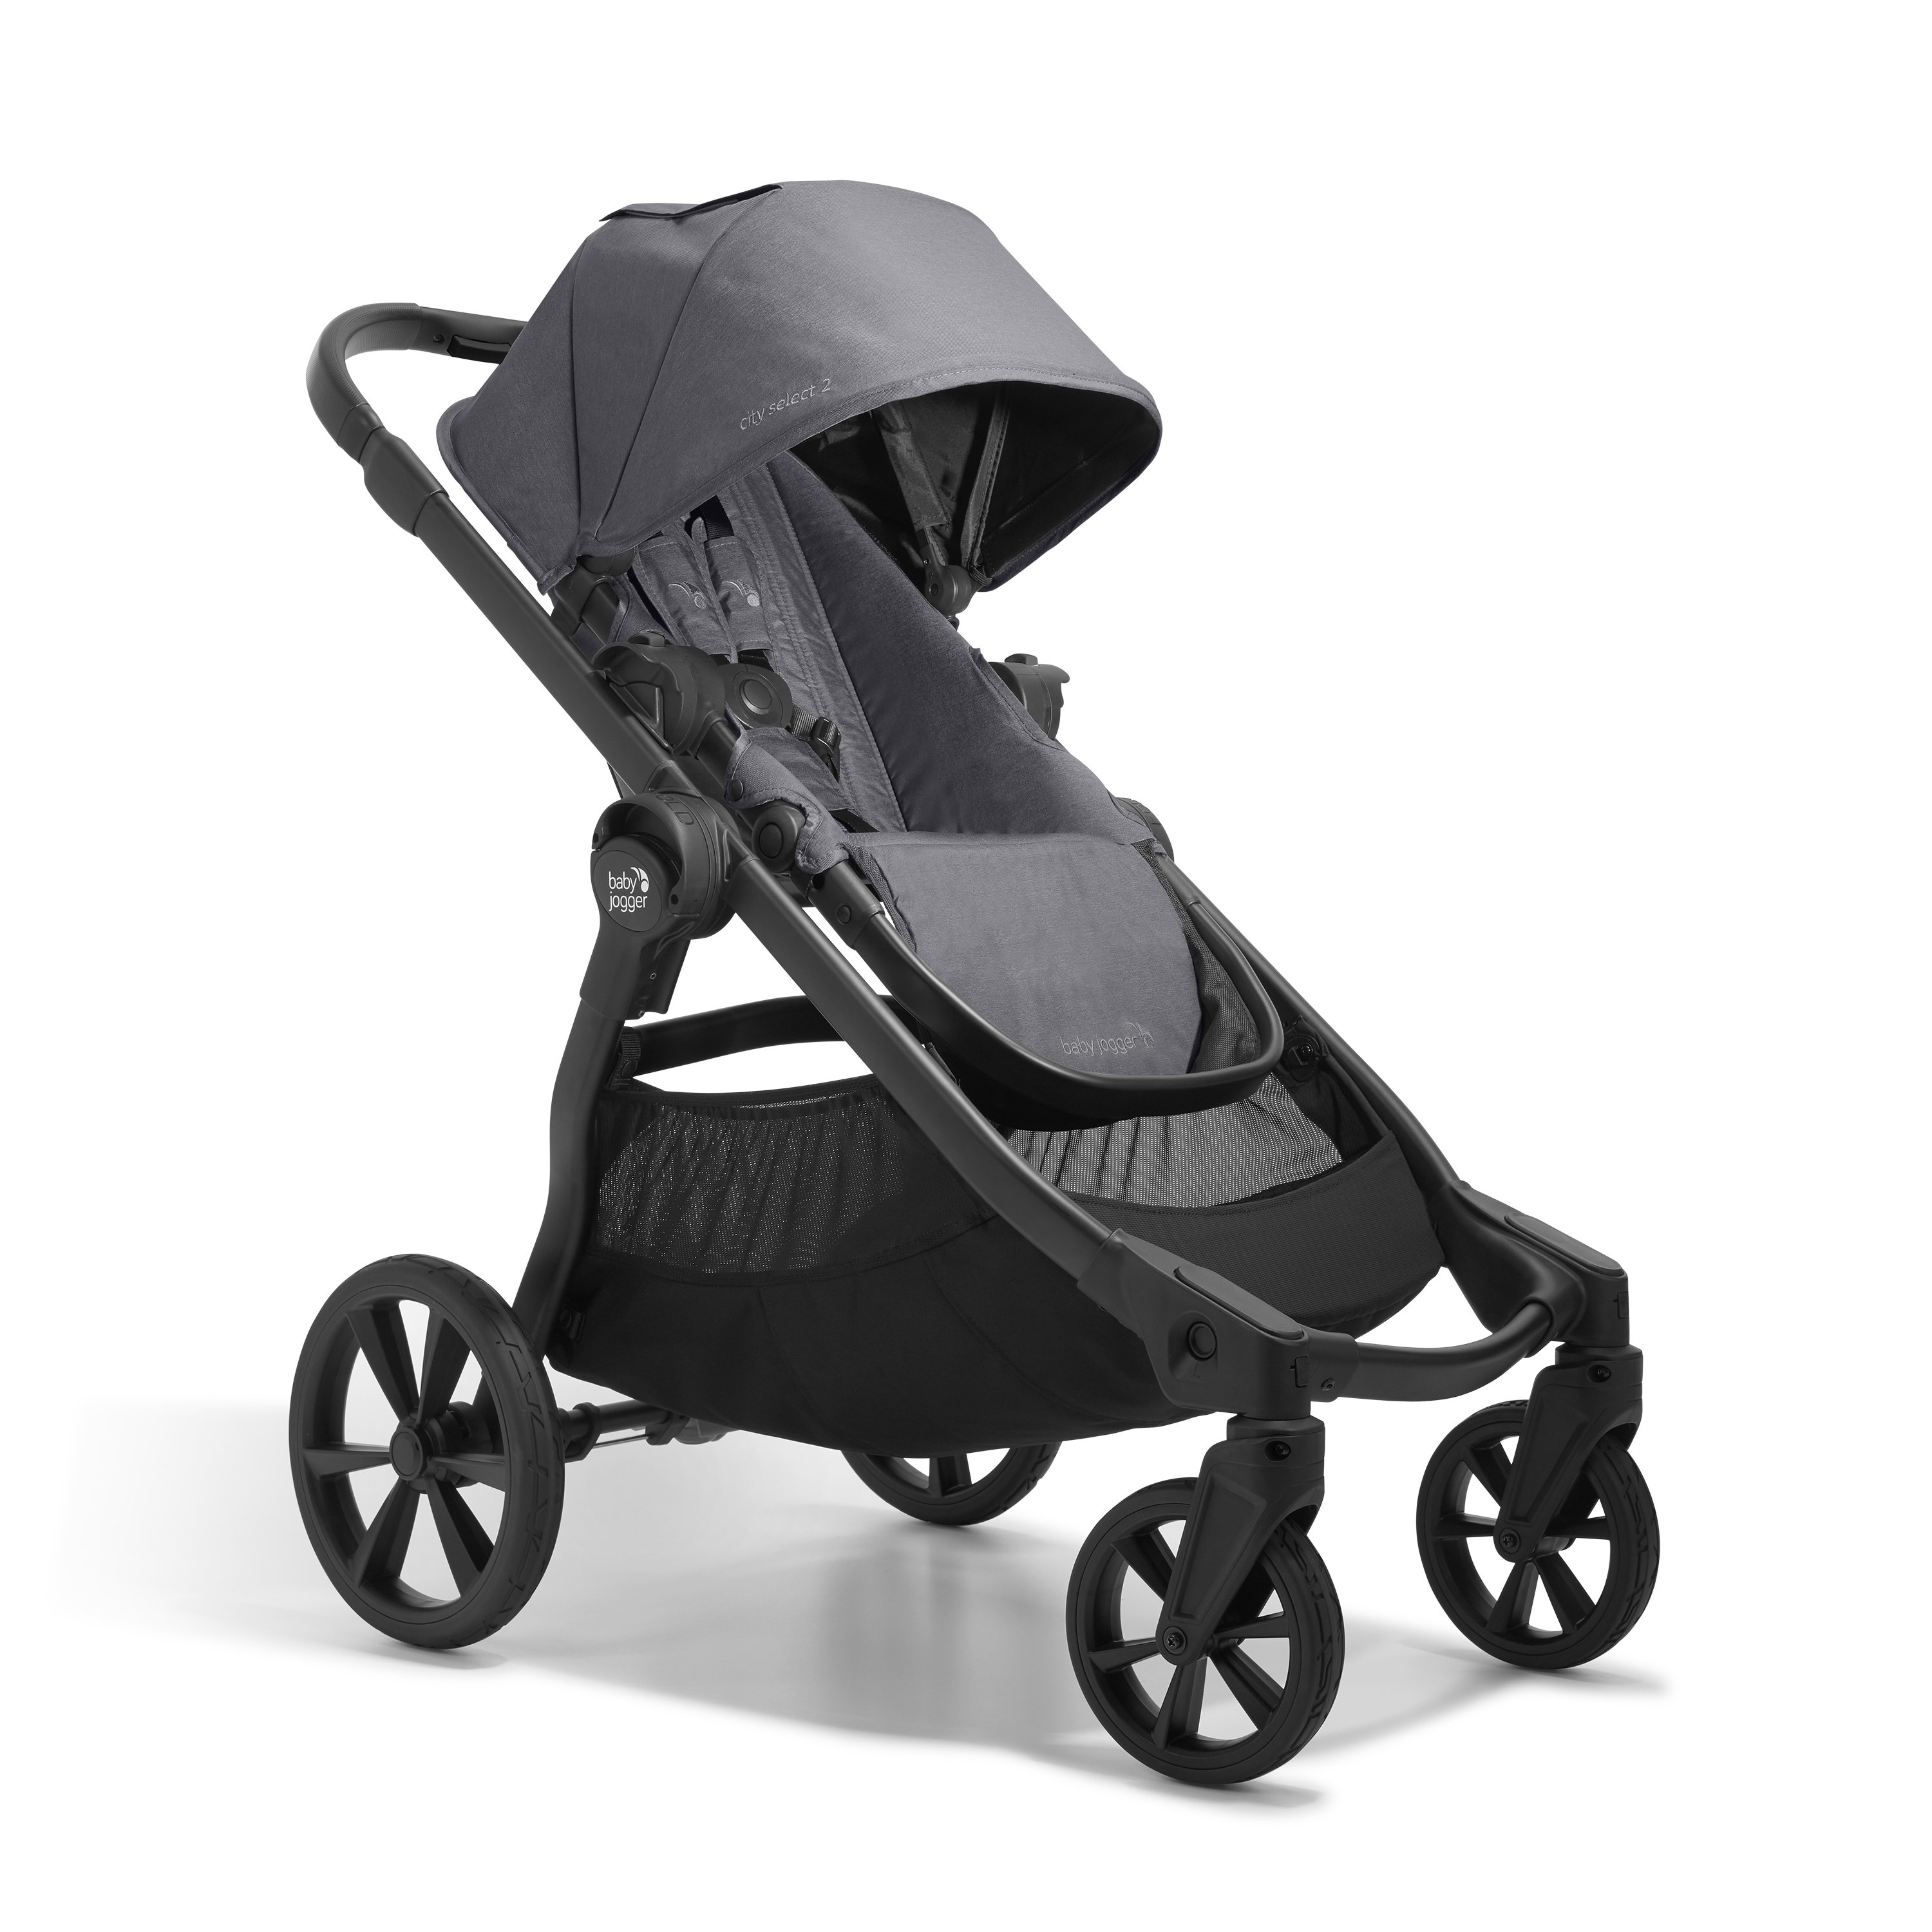 Baby Jogger City Mini 2 Double Stroller Review: compact and high-quality